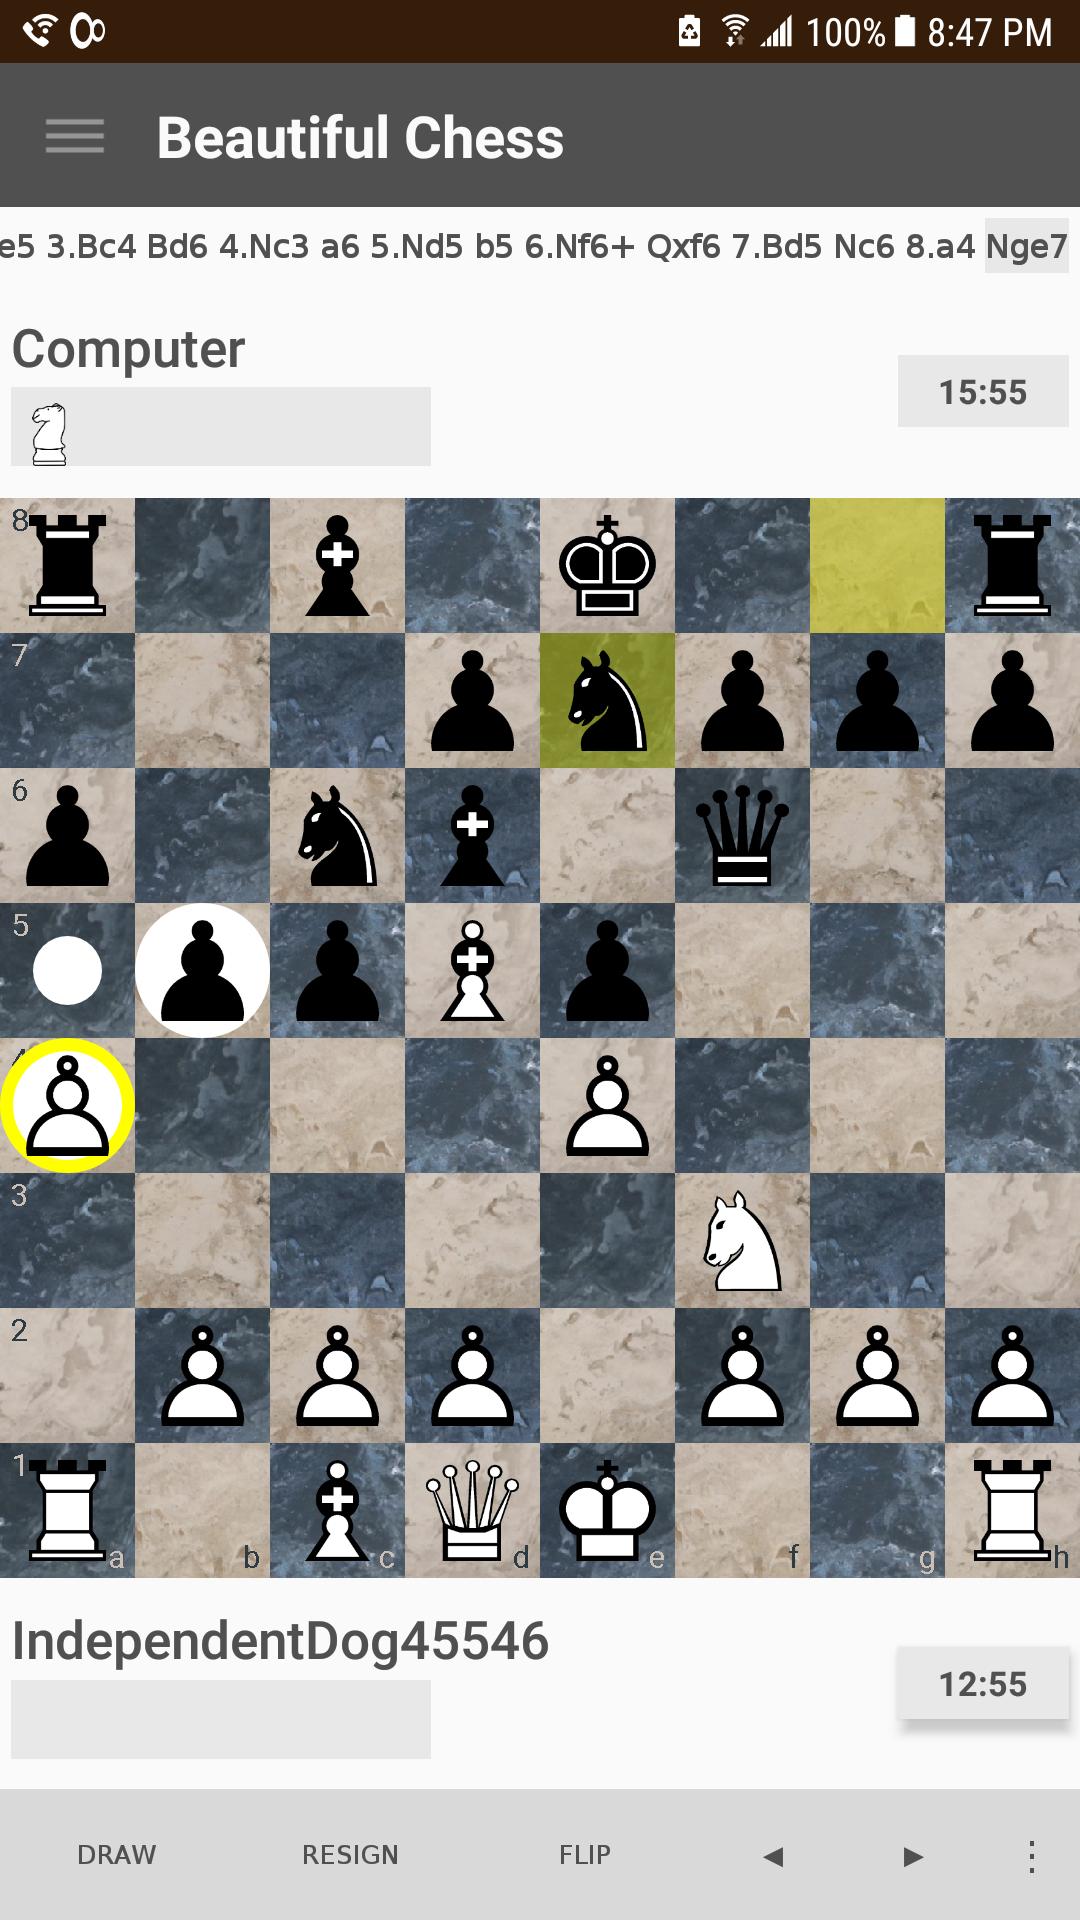 ♛ Beautiful Chess: Play Free Online, OTB, vs CPU for Android - APK Download